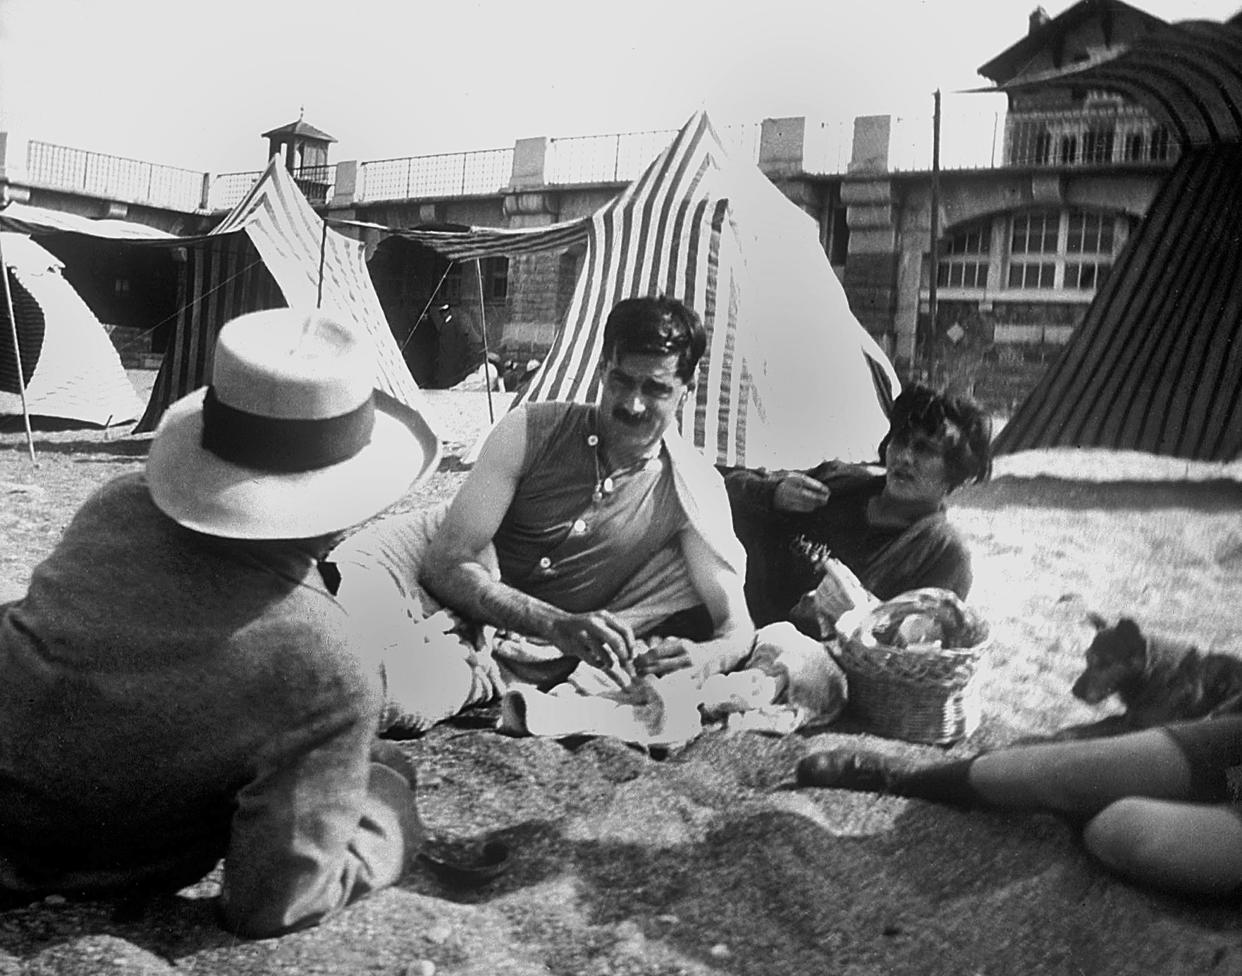 Coco Chanel (right), on the beach in Saint Jean de Luz in 1917, made sunkissed skin fashionable. (Photo: Apic/Getty Images)